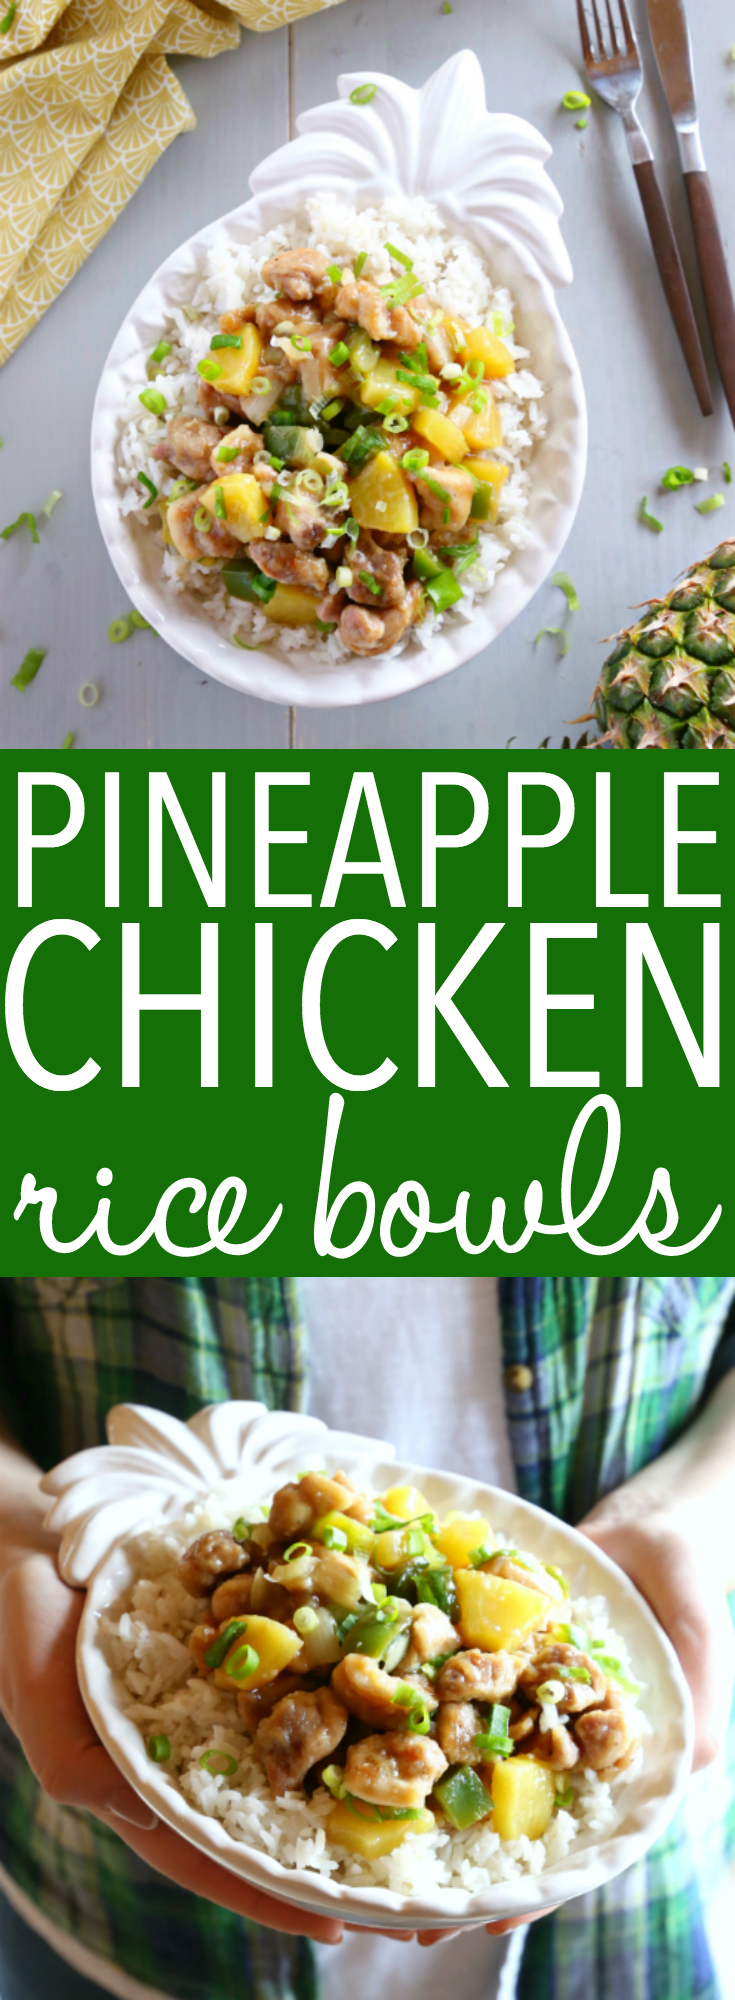 These Pineapple Chicken Rice Bowls make the perfect healthy easy weeknight meal! Made with crispy chicken, fresh veggies, pineapple and a sweet Asian-inspired sauce, they're on the table in 25 minutes or less! Recipe from thebusybaker.ca! #pineapplechicken #easychickenrecipe #pineapplechickenstirfry #asianchicken via @busybakerblog